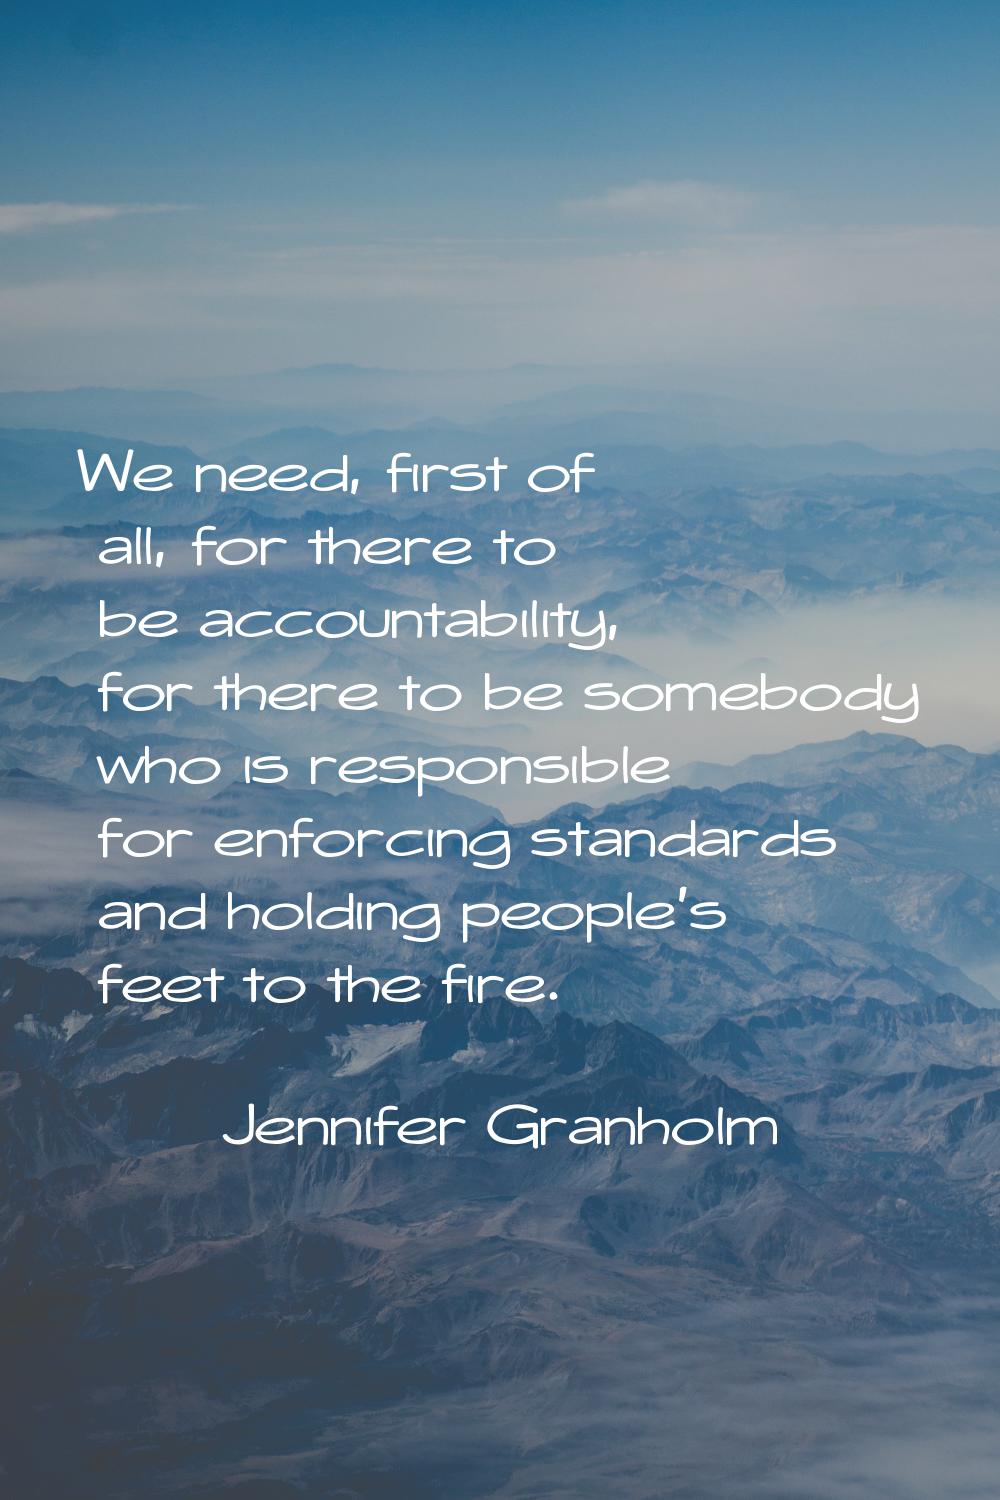 We need, first of all, for there to be accountability, for there to be somebody who is responsible 